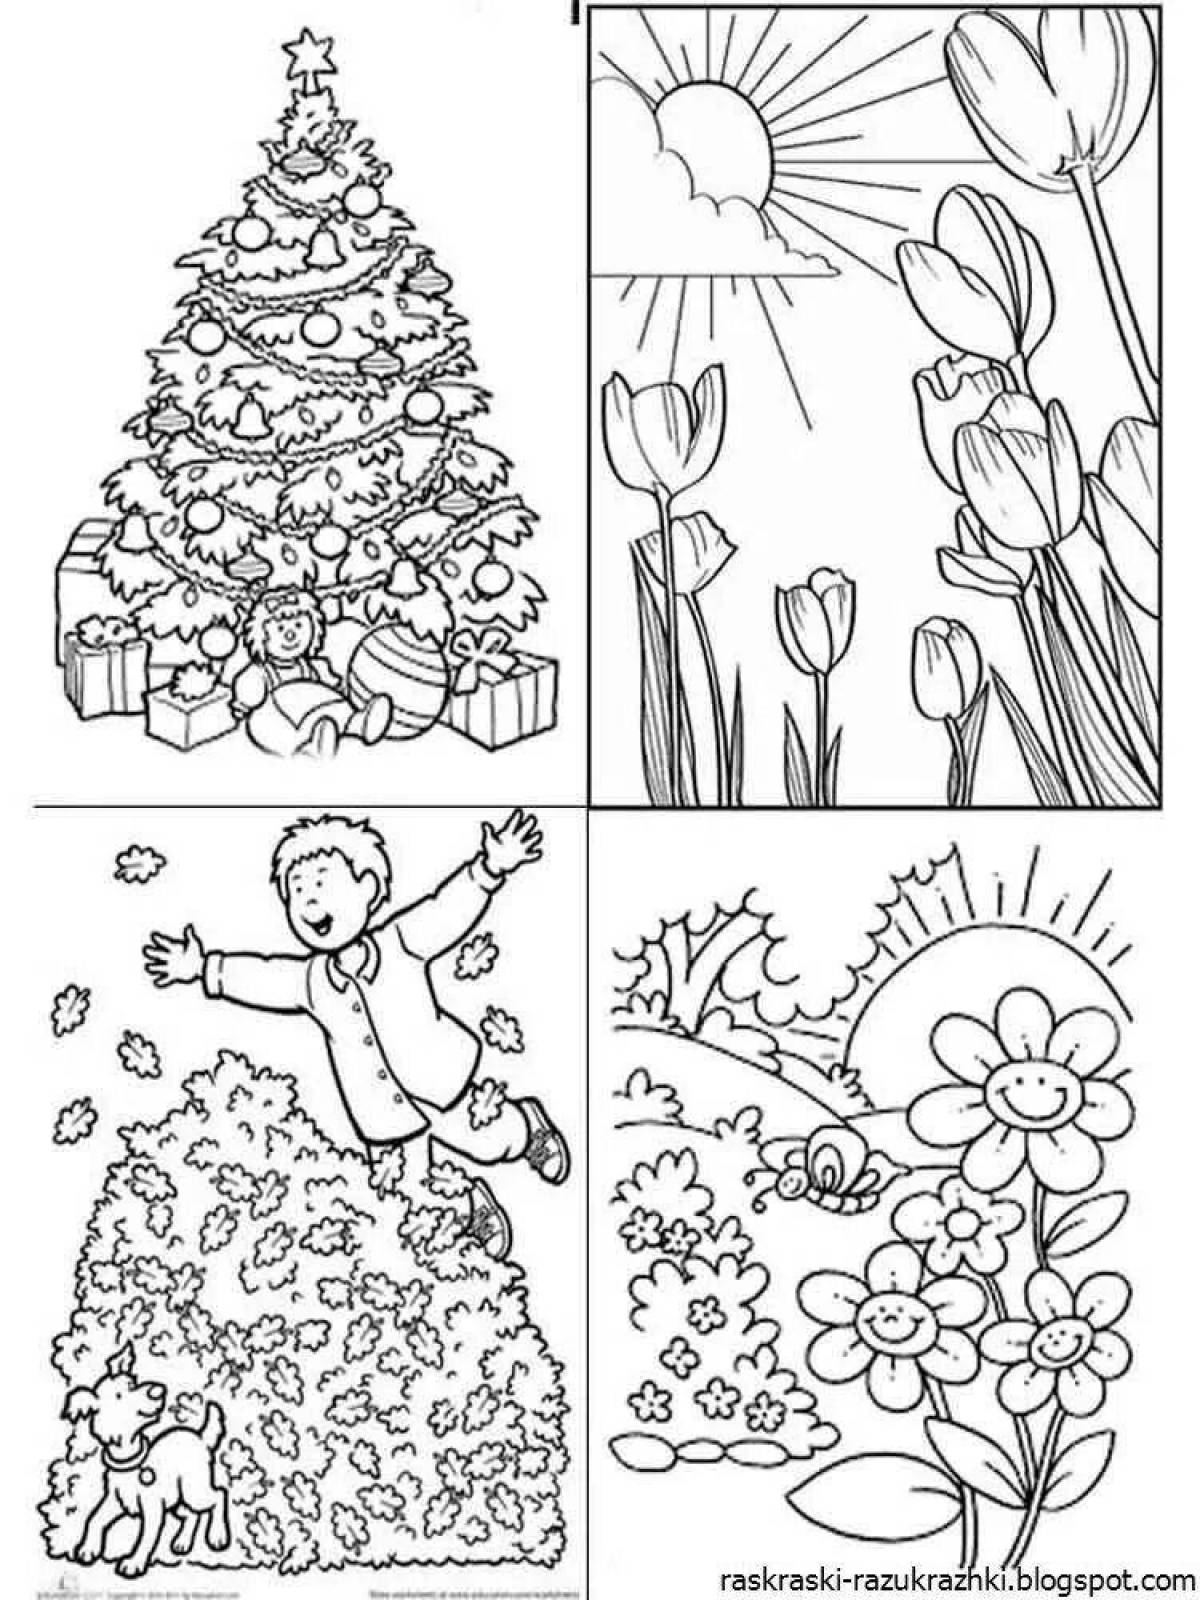 Exquisite spring coloring book for 6-7 year olds